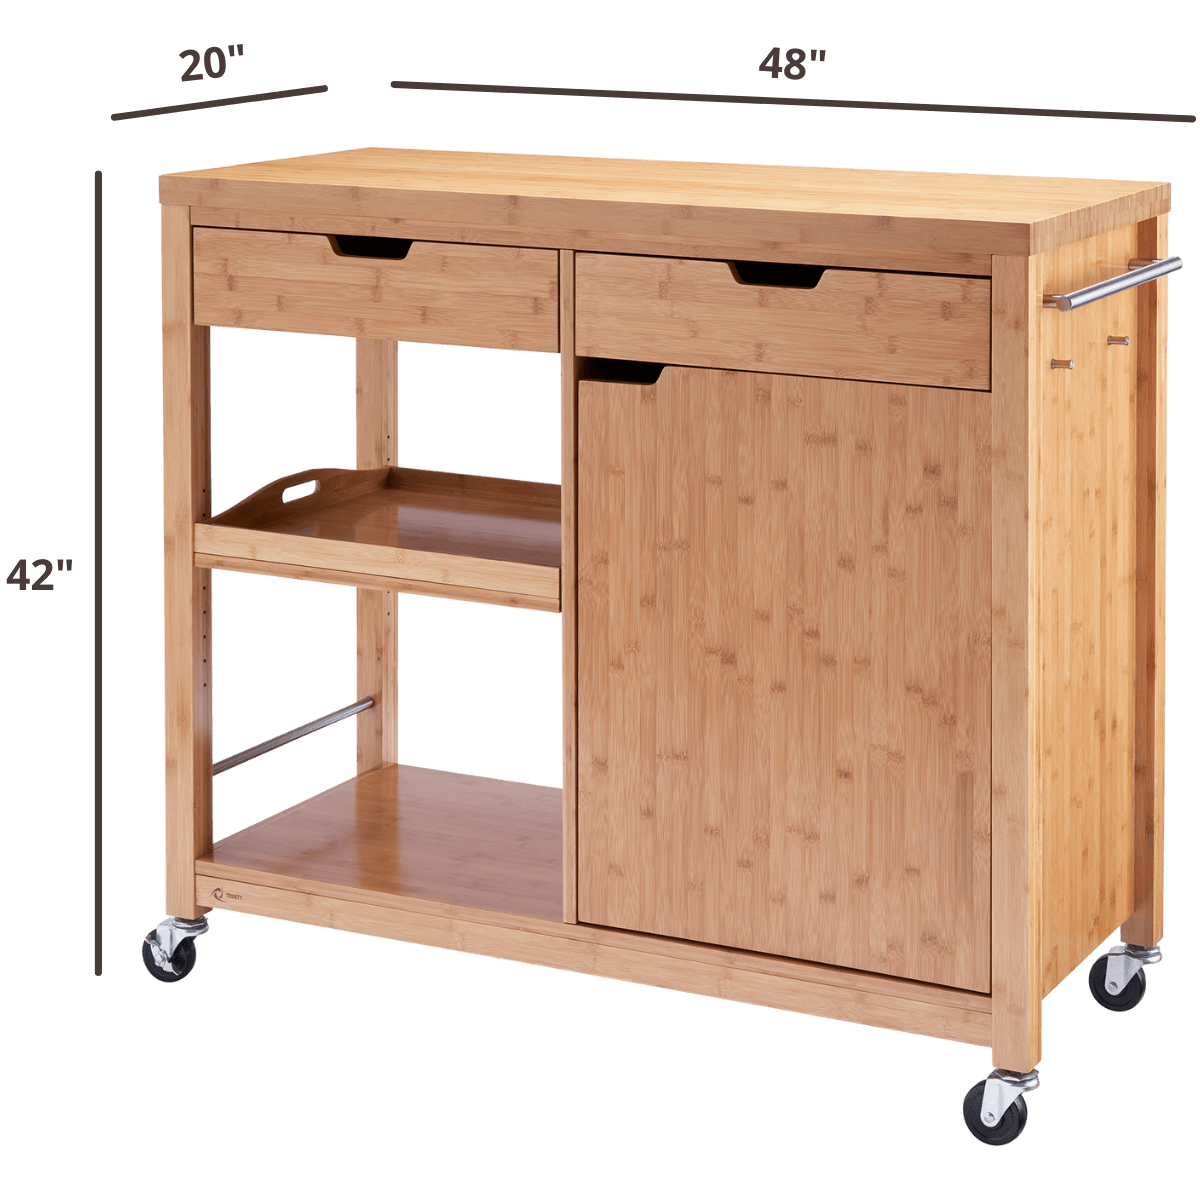 42 inches tall by 48 inches wide by 20 inches deep kitchen island